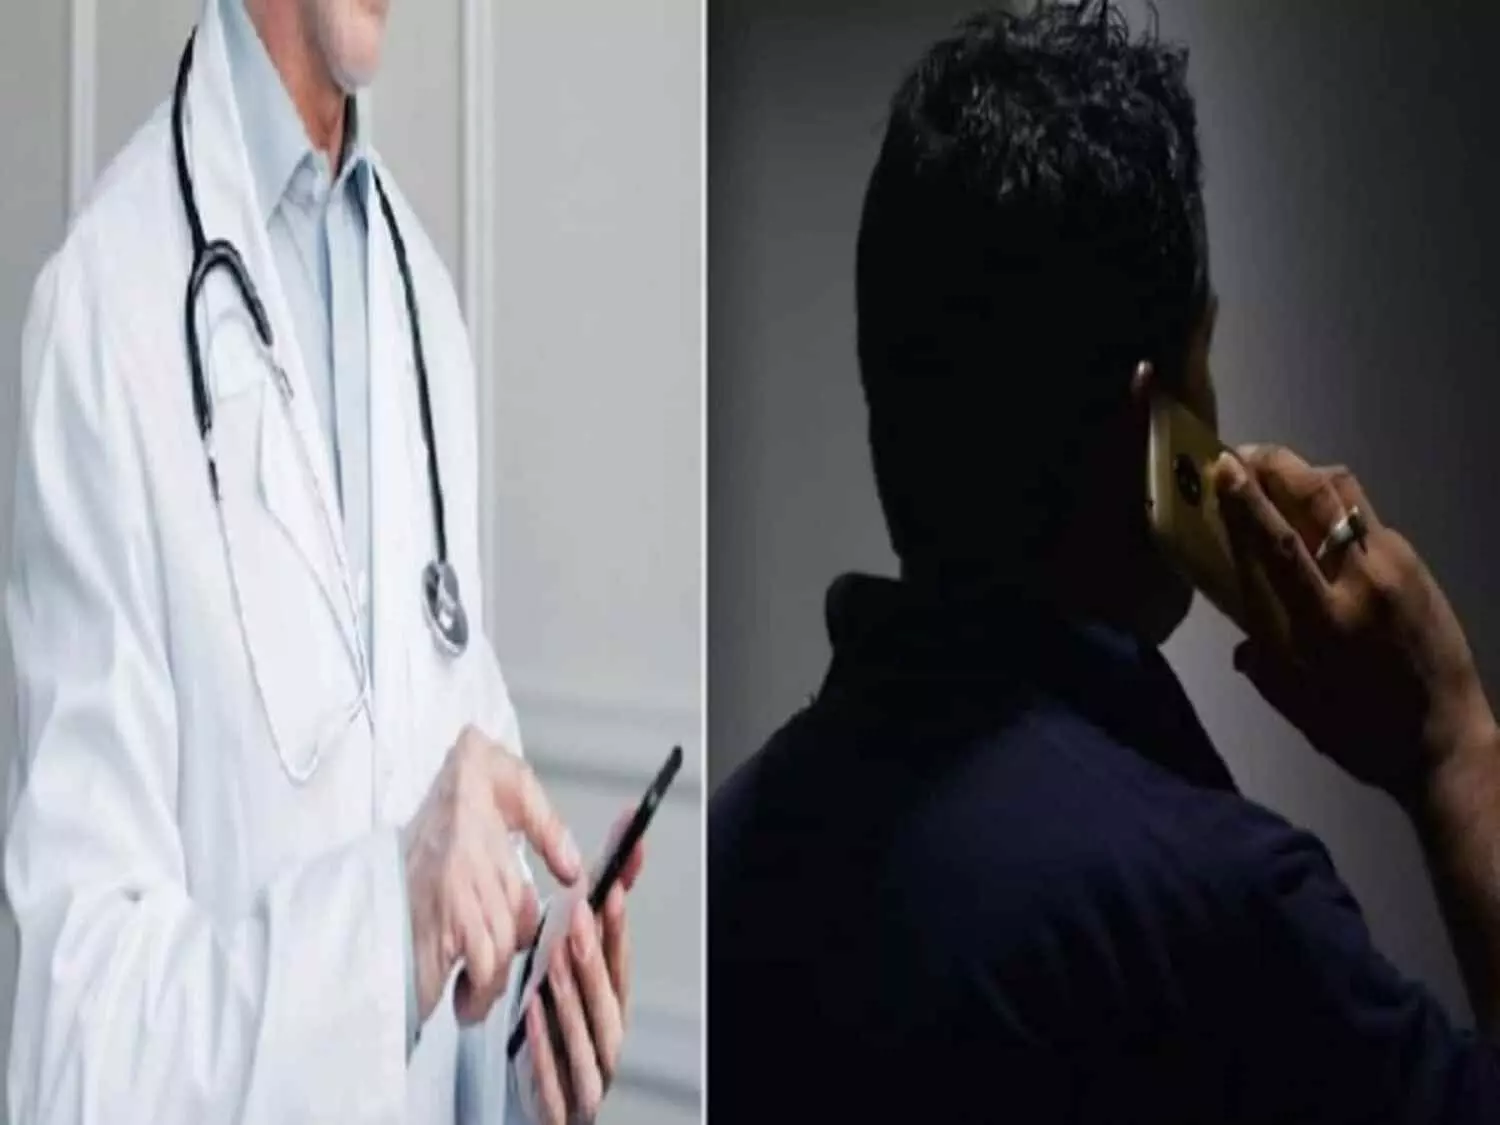 ghaziabad doctor receives threatening call over supporting hindu organizations